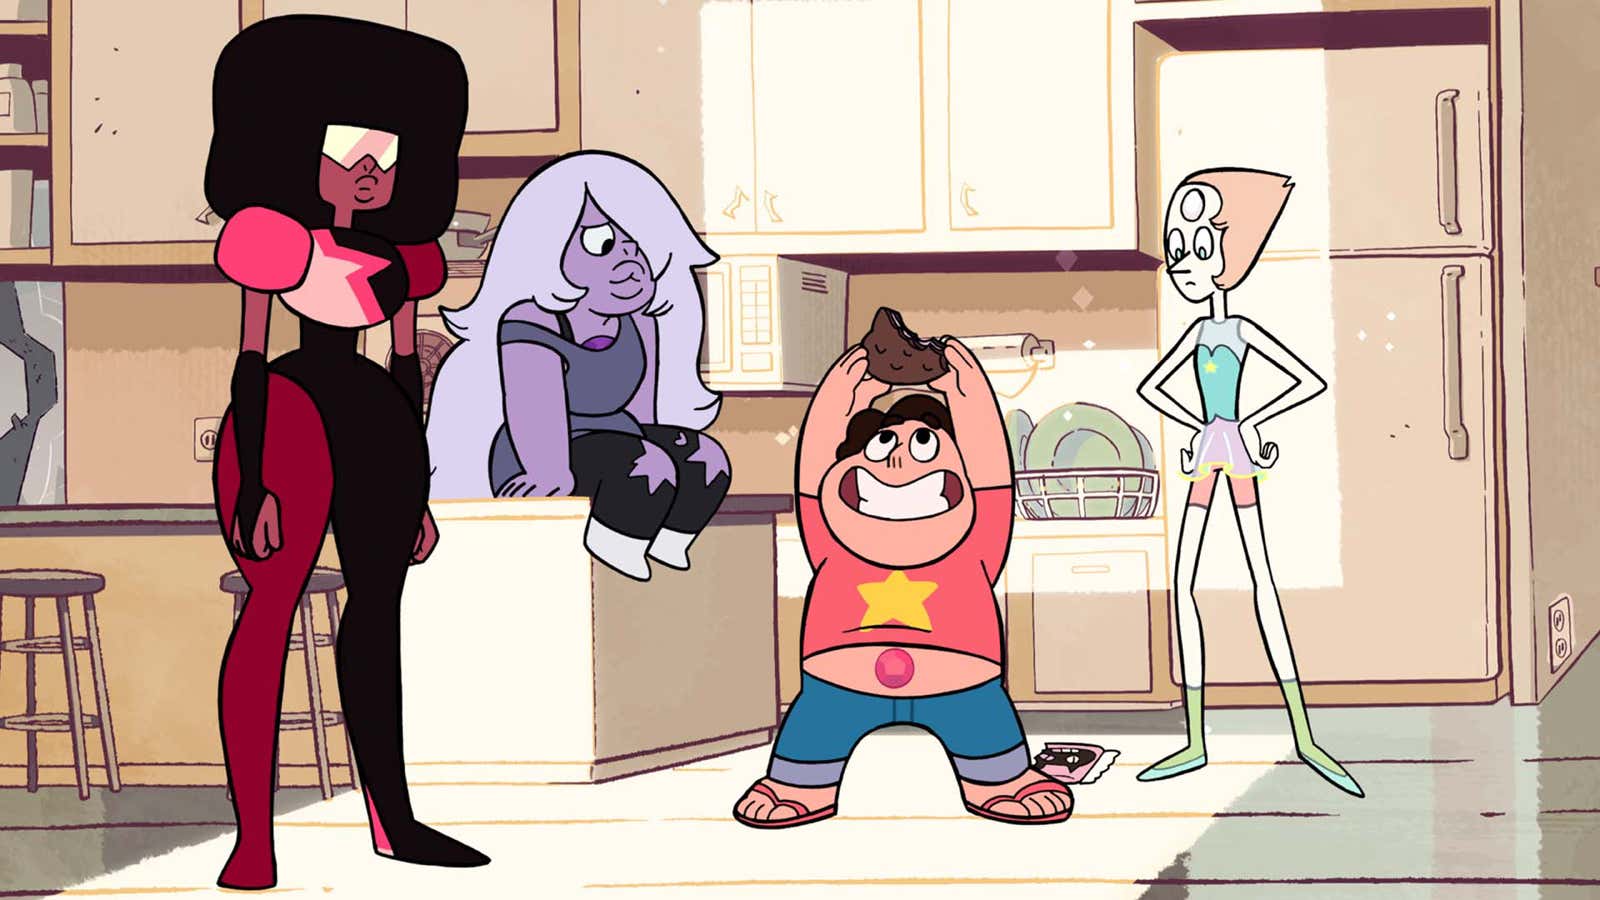 Steven Universe Is the Show Your Kids Should Be Watching – SheKnows